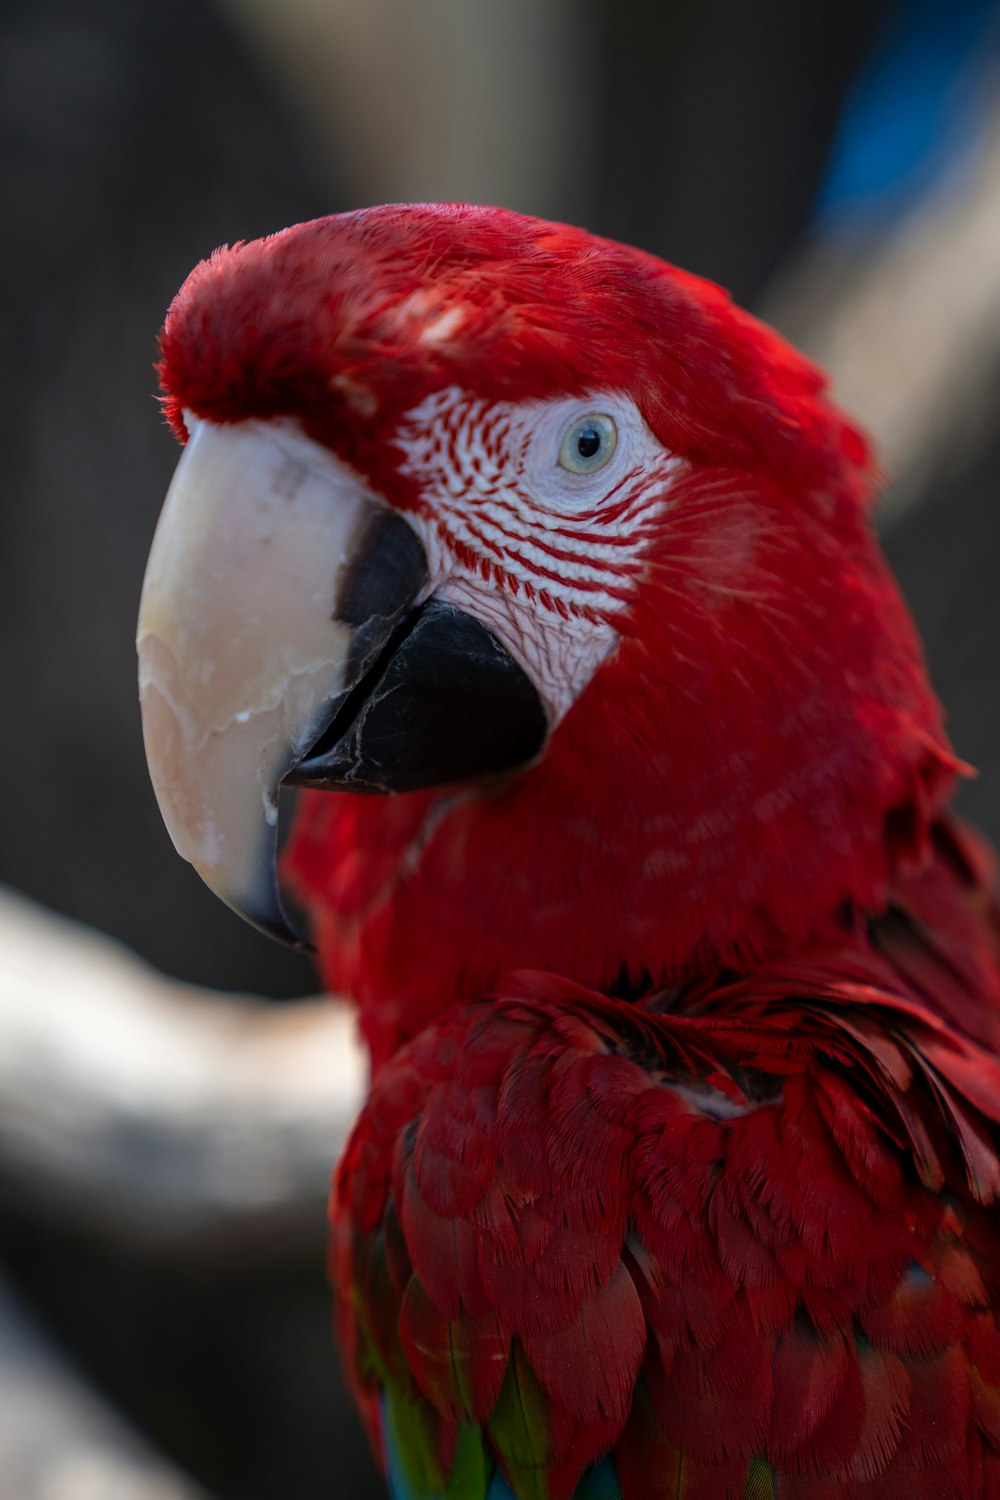 a close up of a parrot on a branch